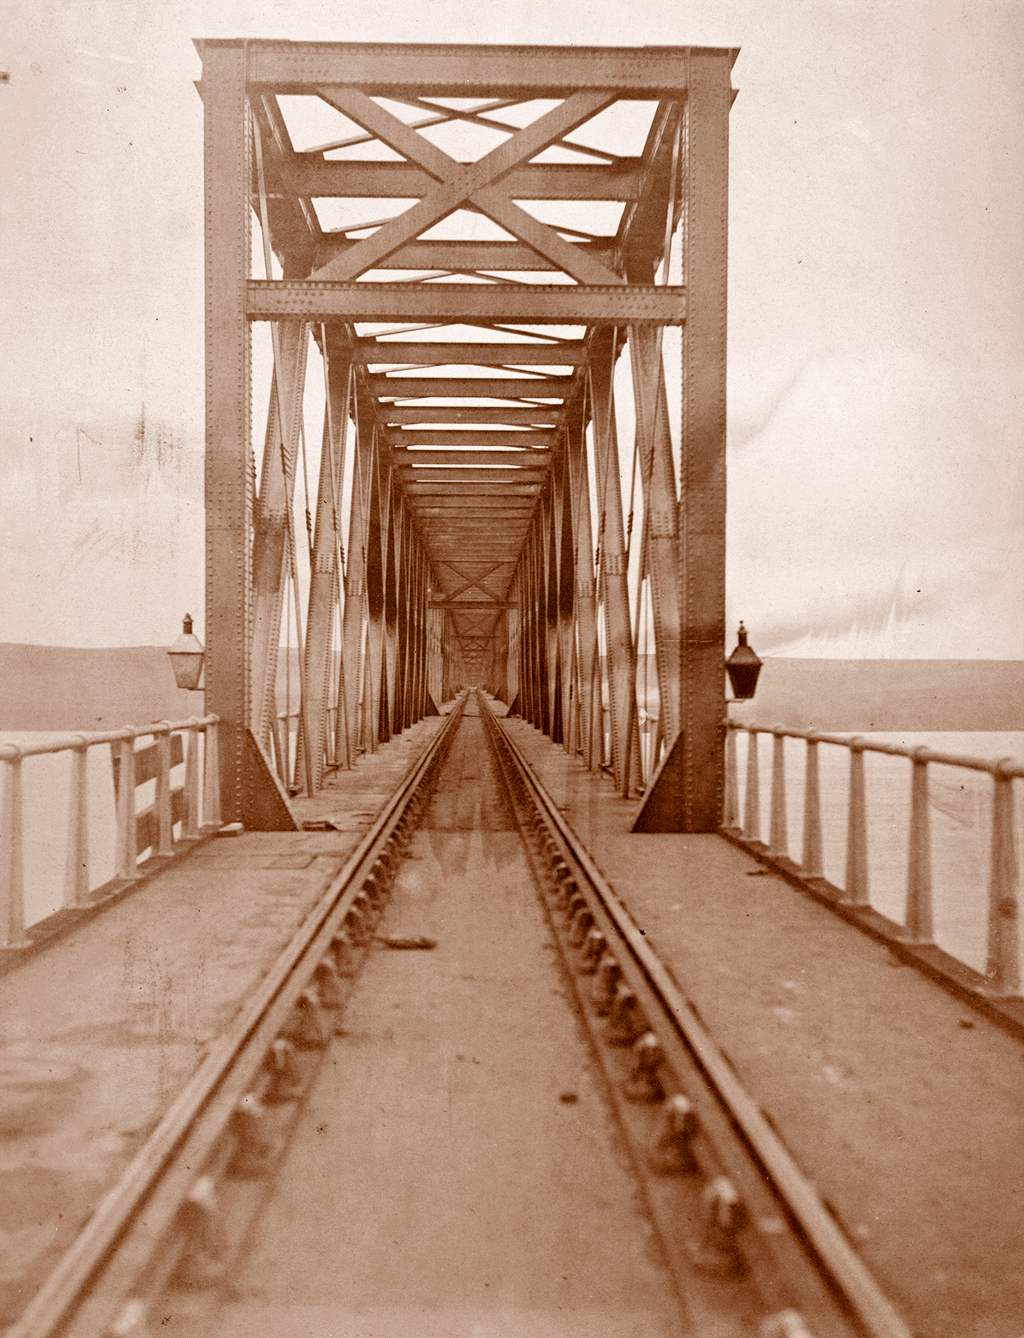 The First Tay Bridge Under Construction